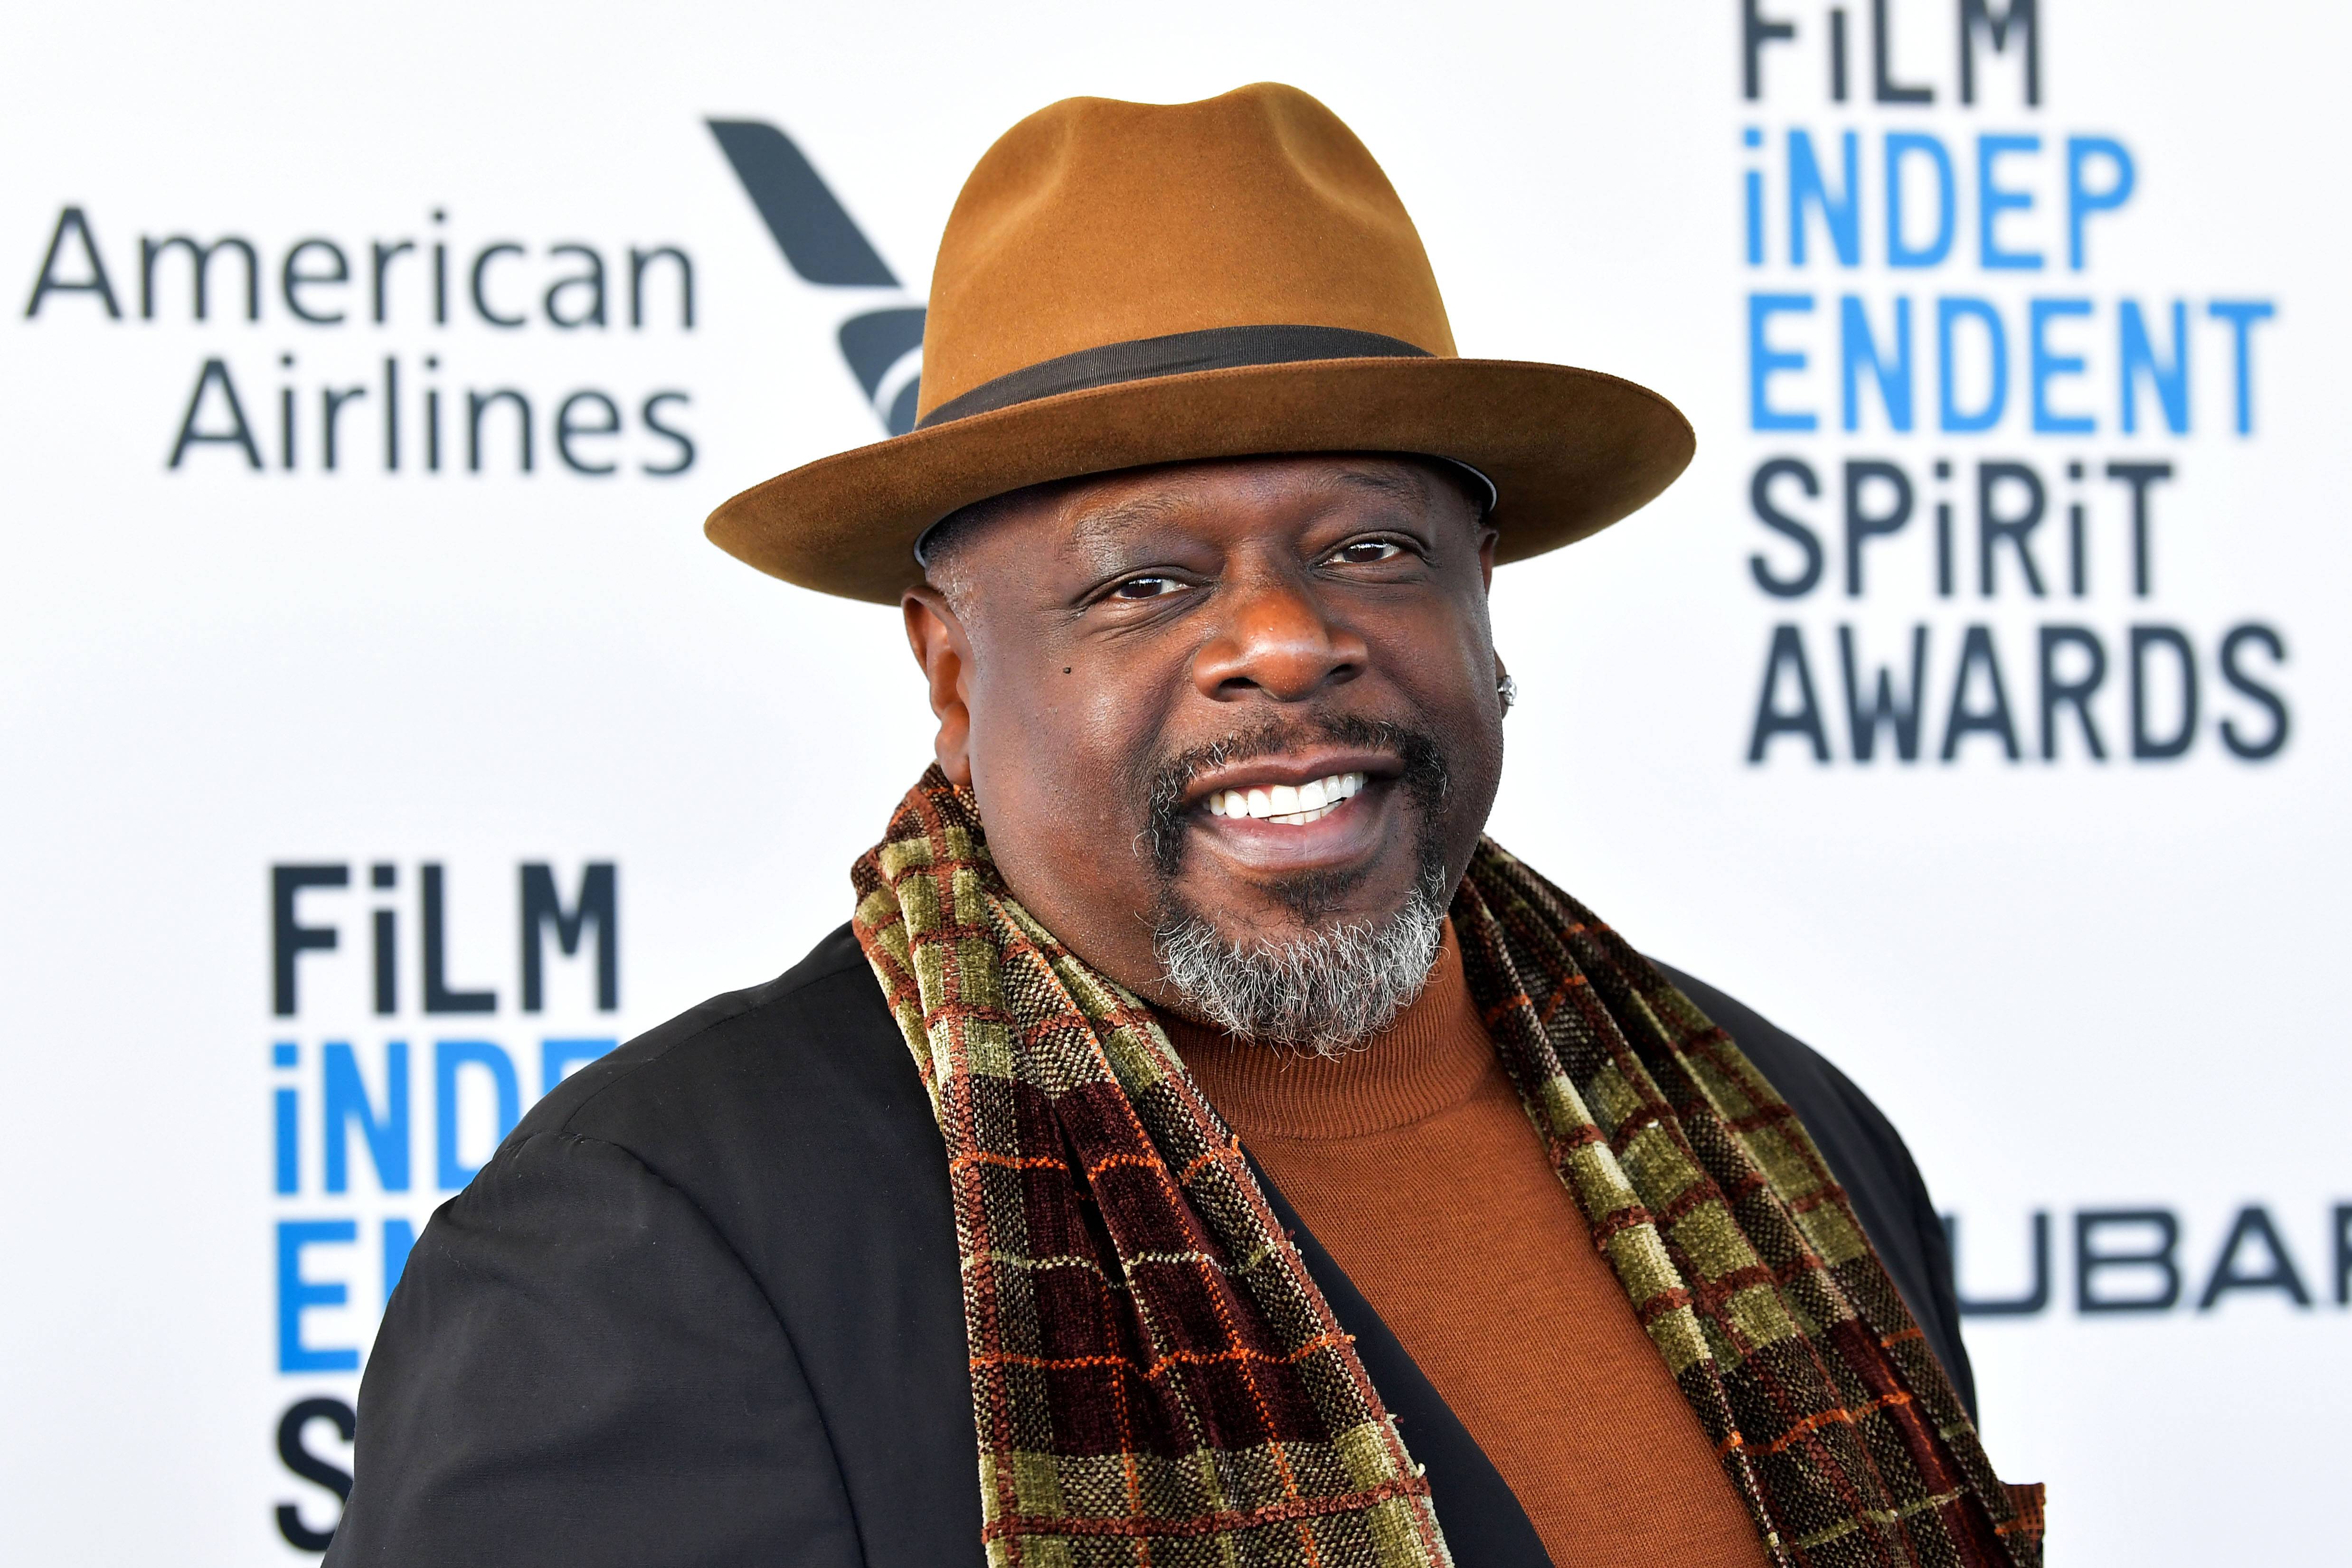 SANTA MONICA, CALIFORNIA - FEBRUARY 23: Cedric the Entertainer attends the 2019 Film Independent Spirit Awards on February 23, 2019 in Santa Monica, California. (Photo by Amy Sussman/Getty Images)